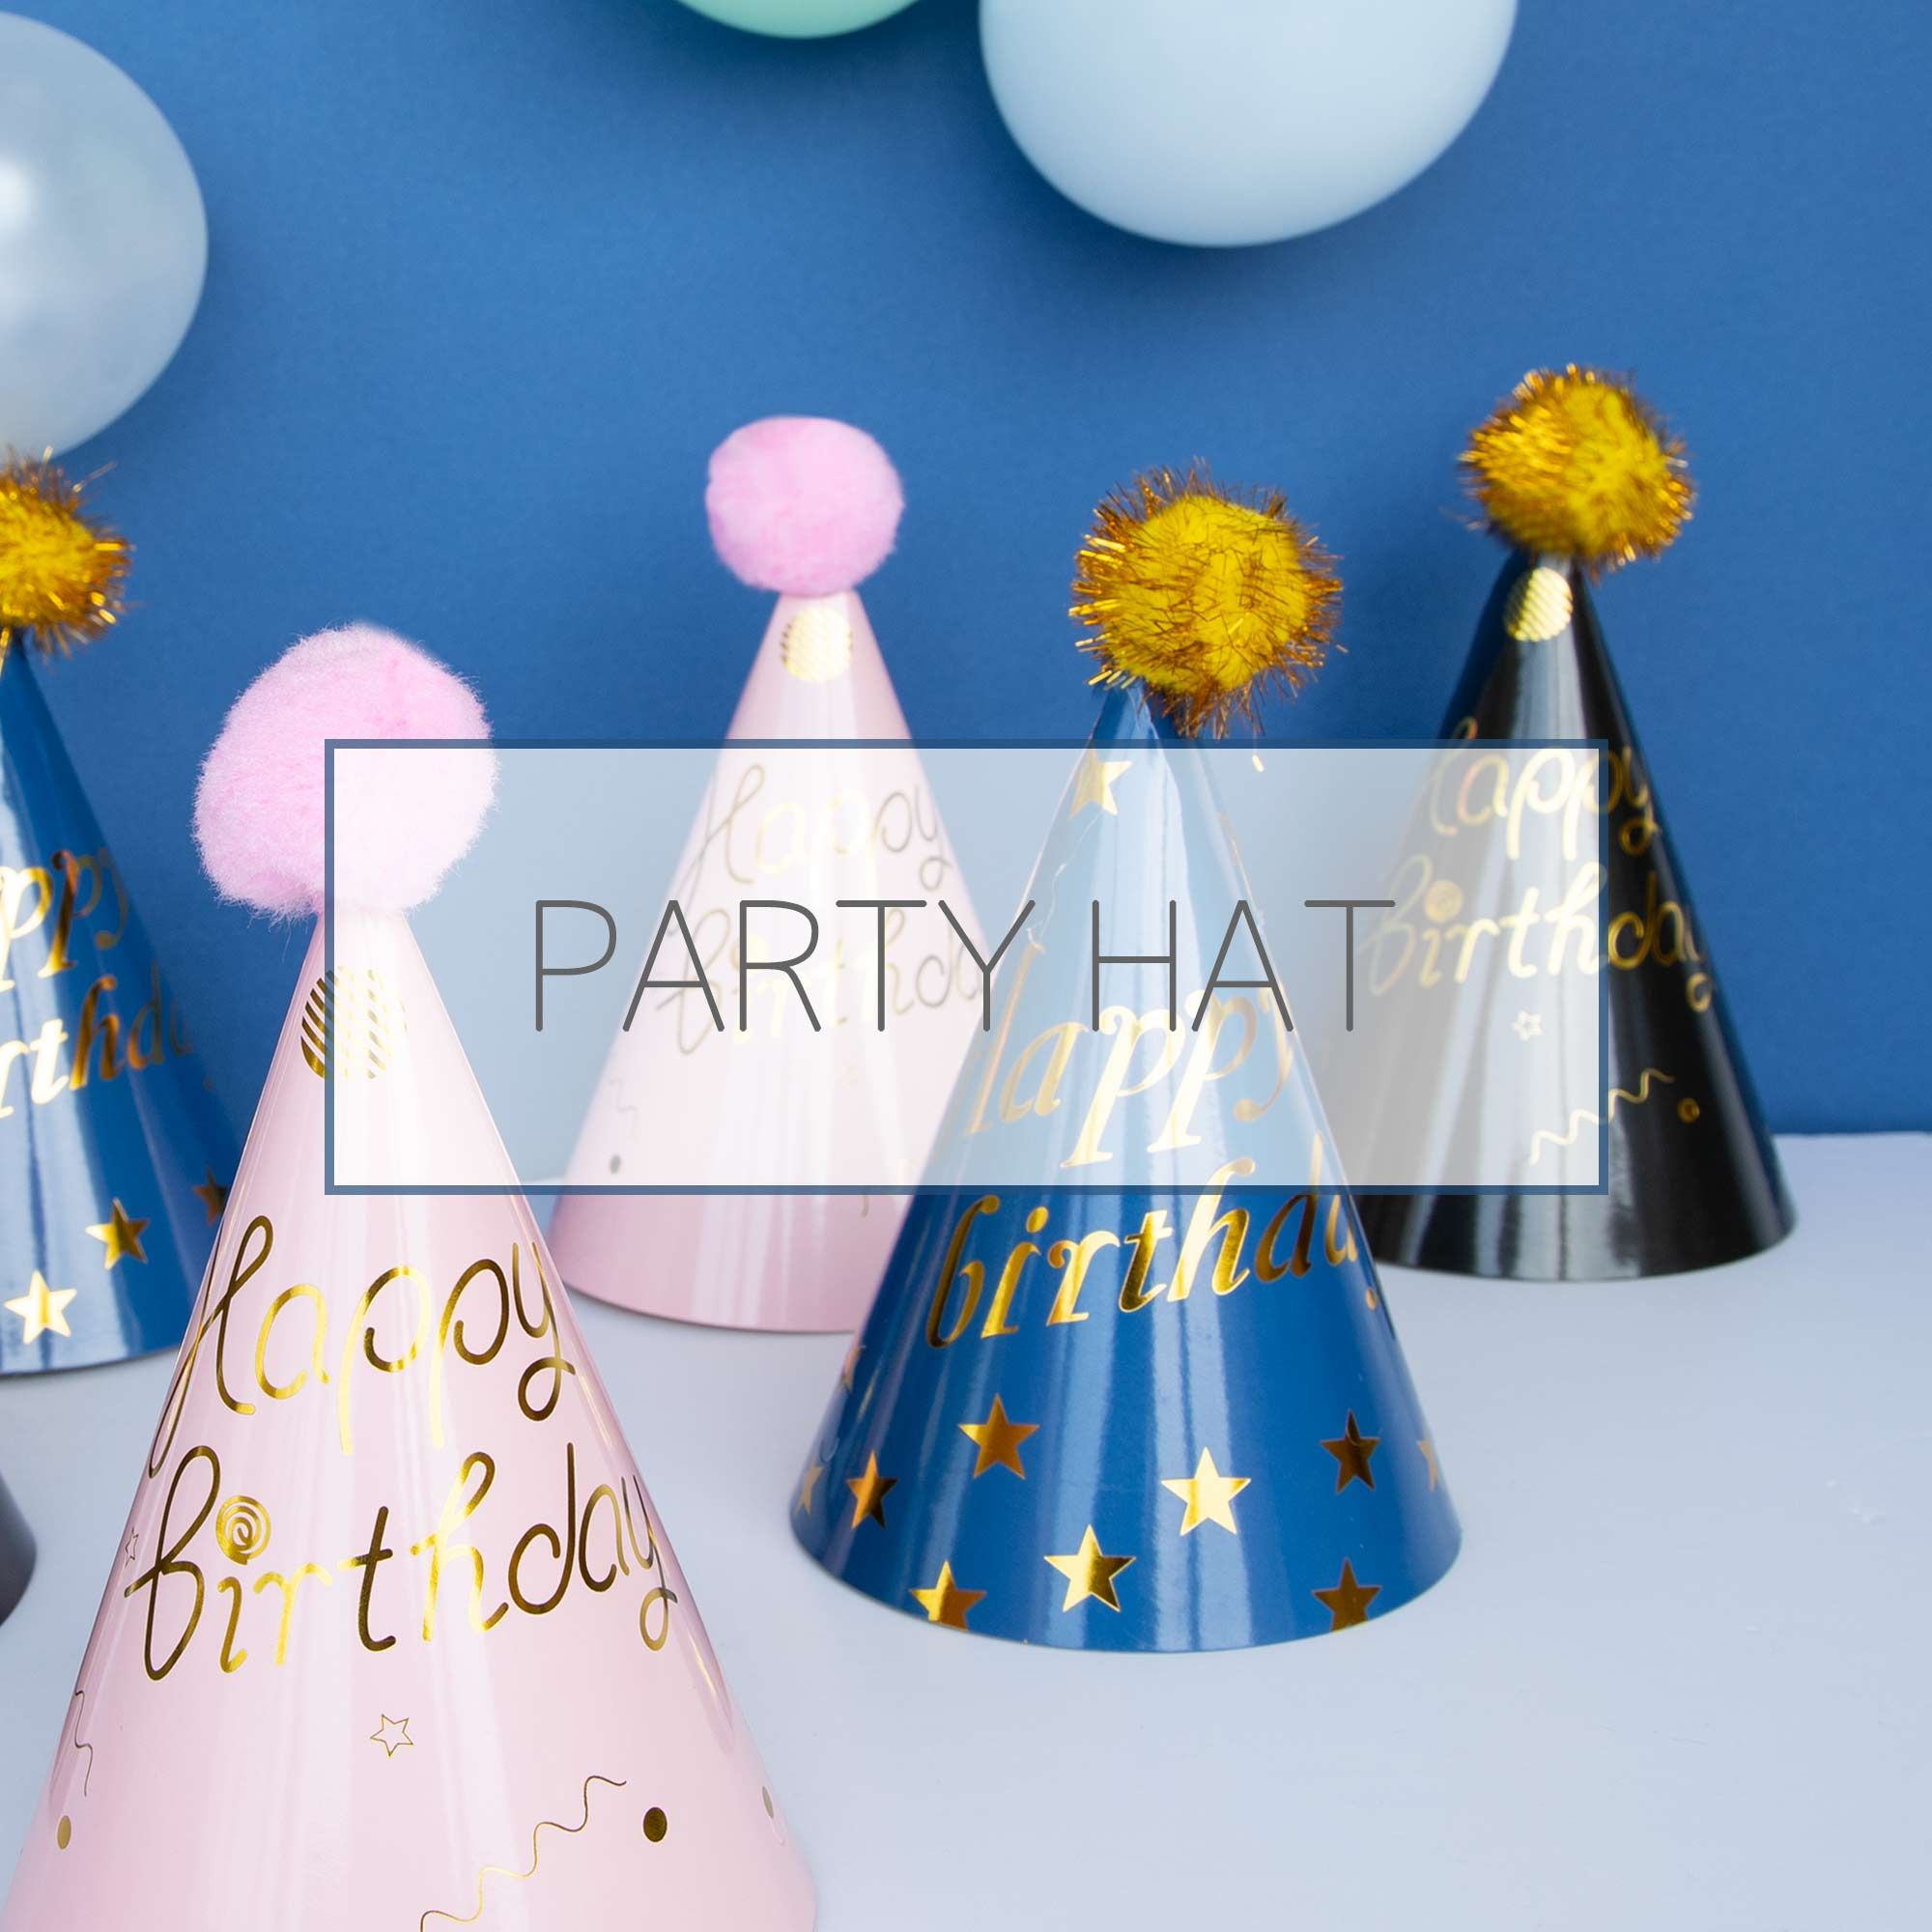 Colorful party hats for a birthday or any anniversary